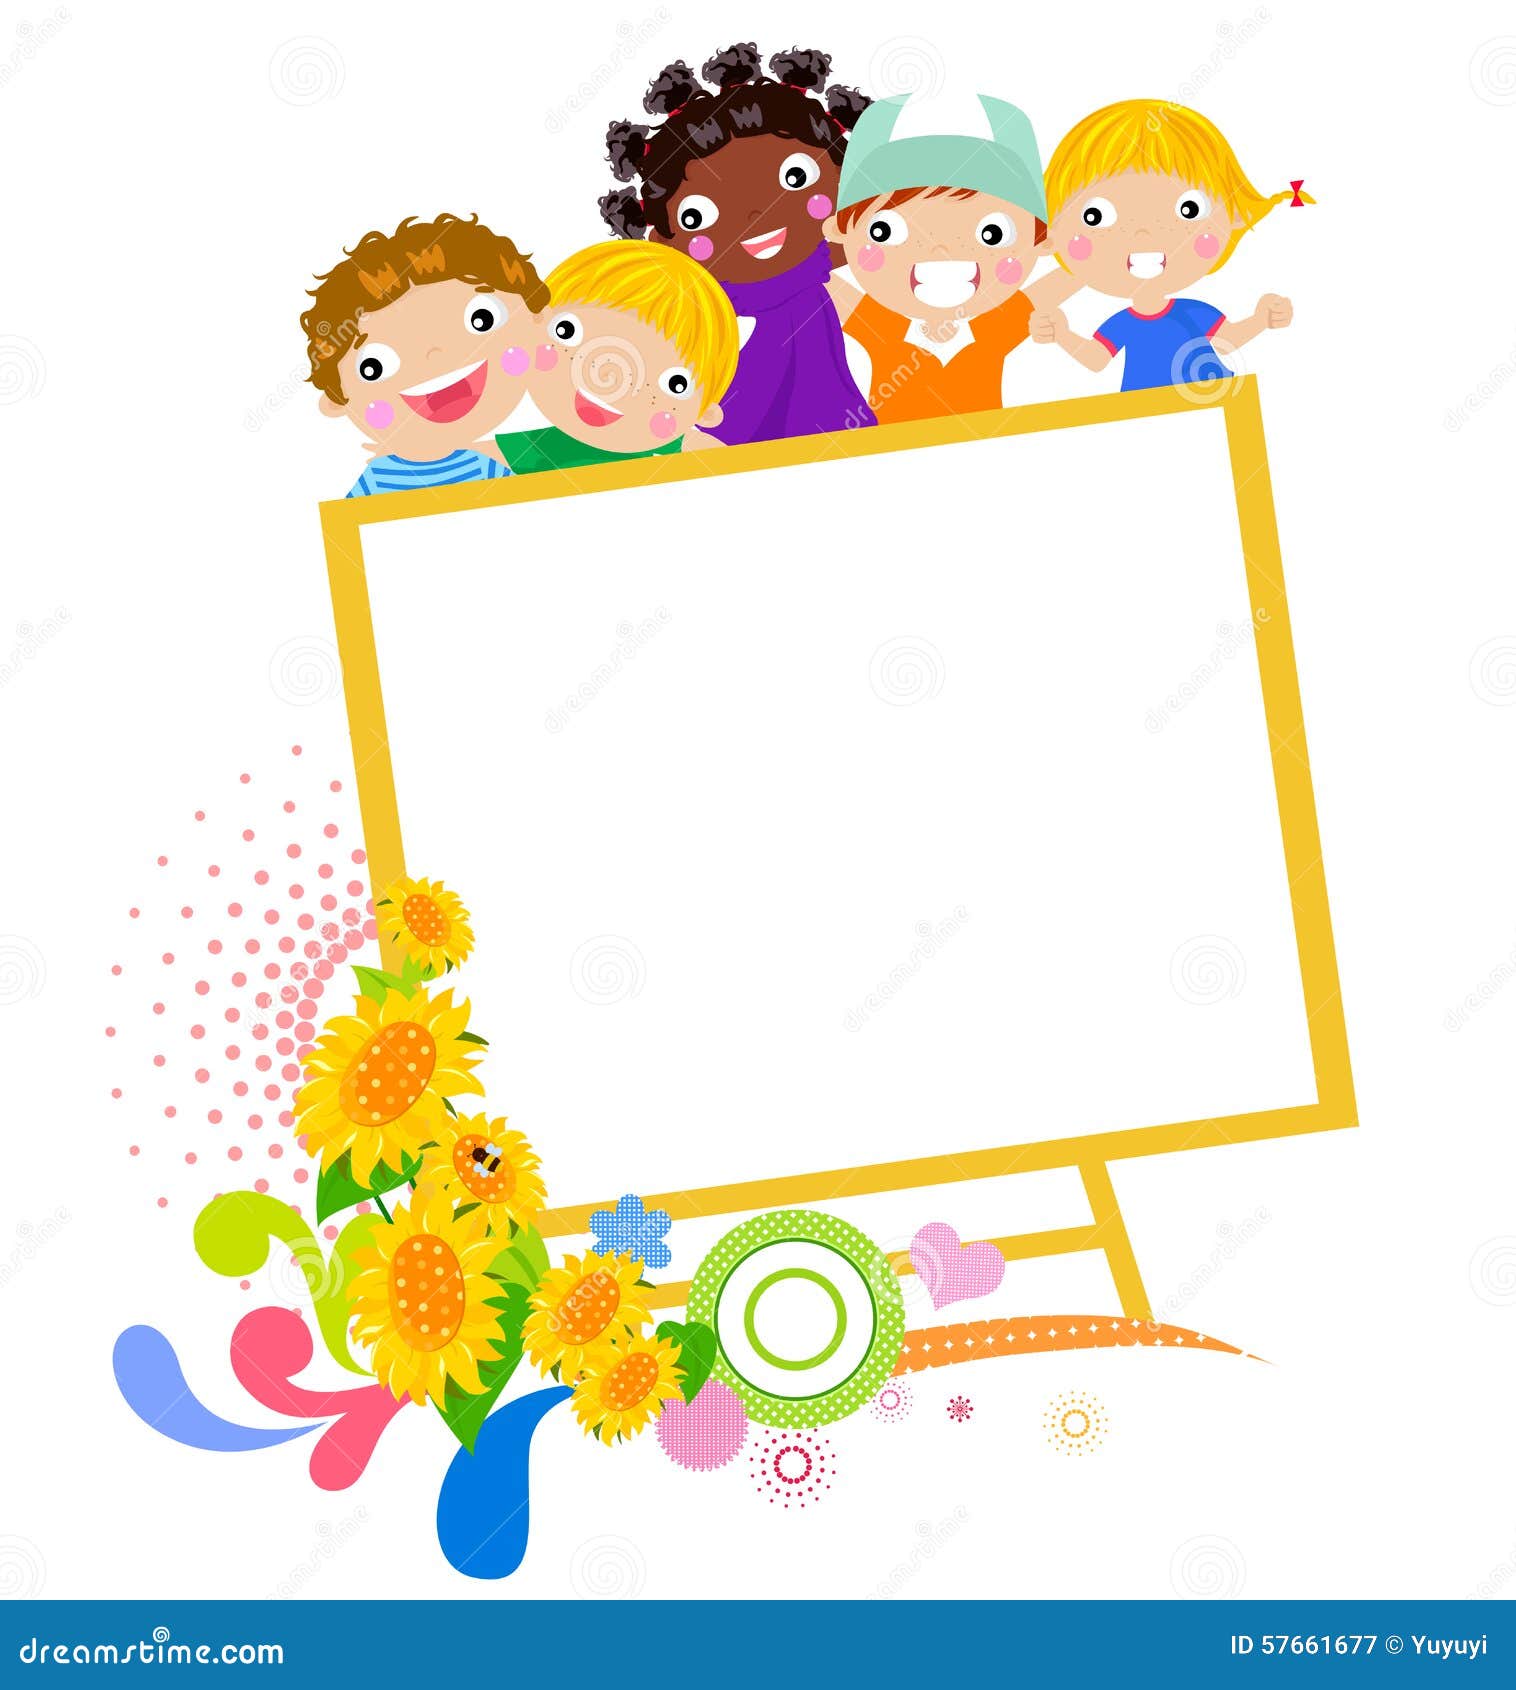 Kids and banner stock vector. Illustration of educate - 57661677